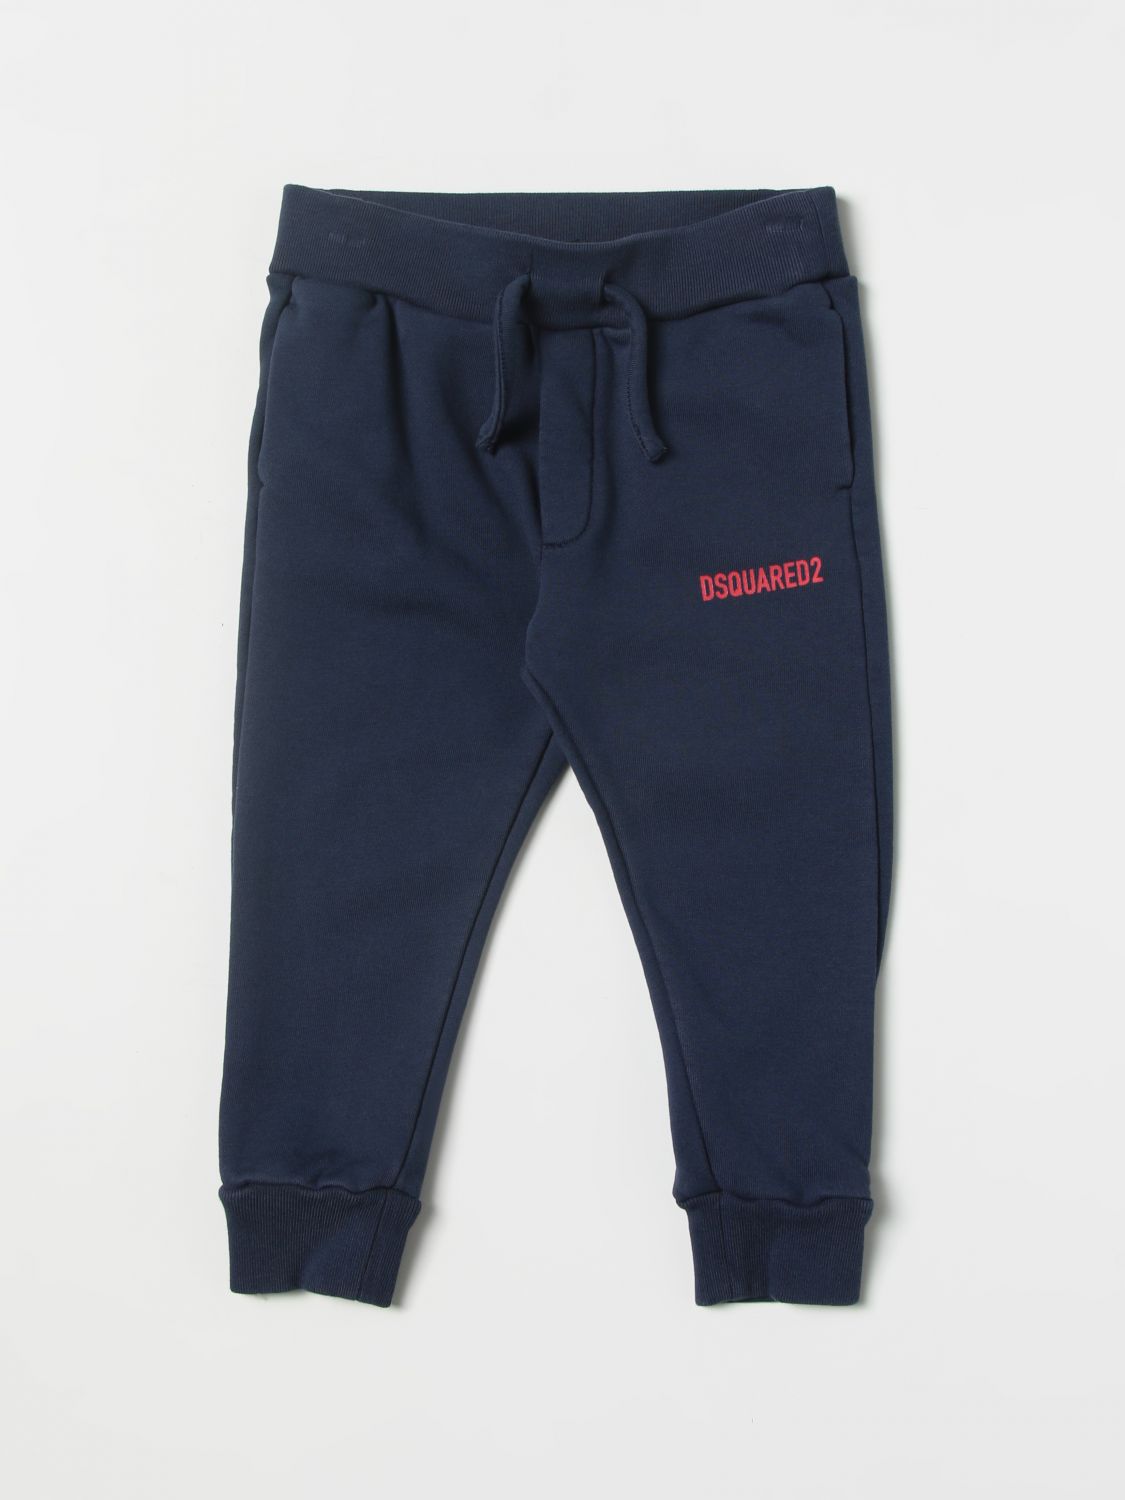 Dsquared2 Junior Babies' Trousers  Kids In Blue